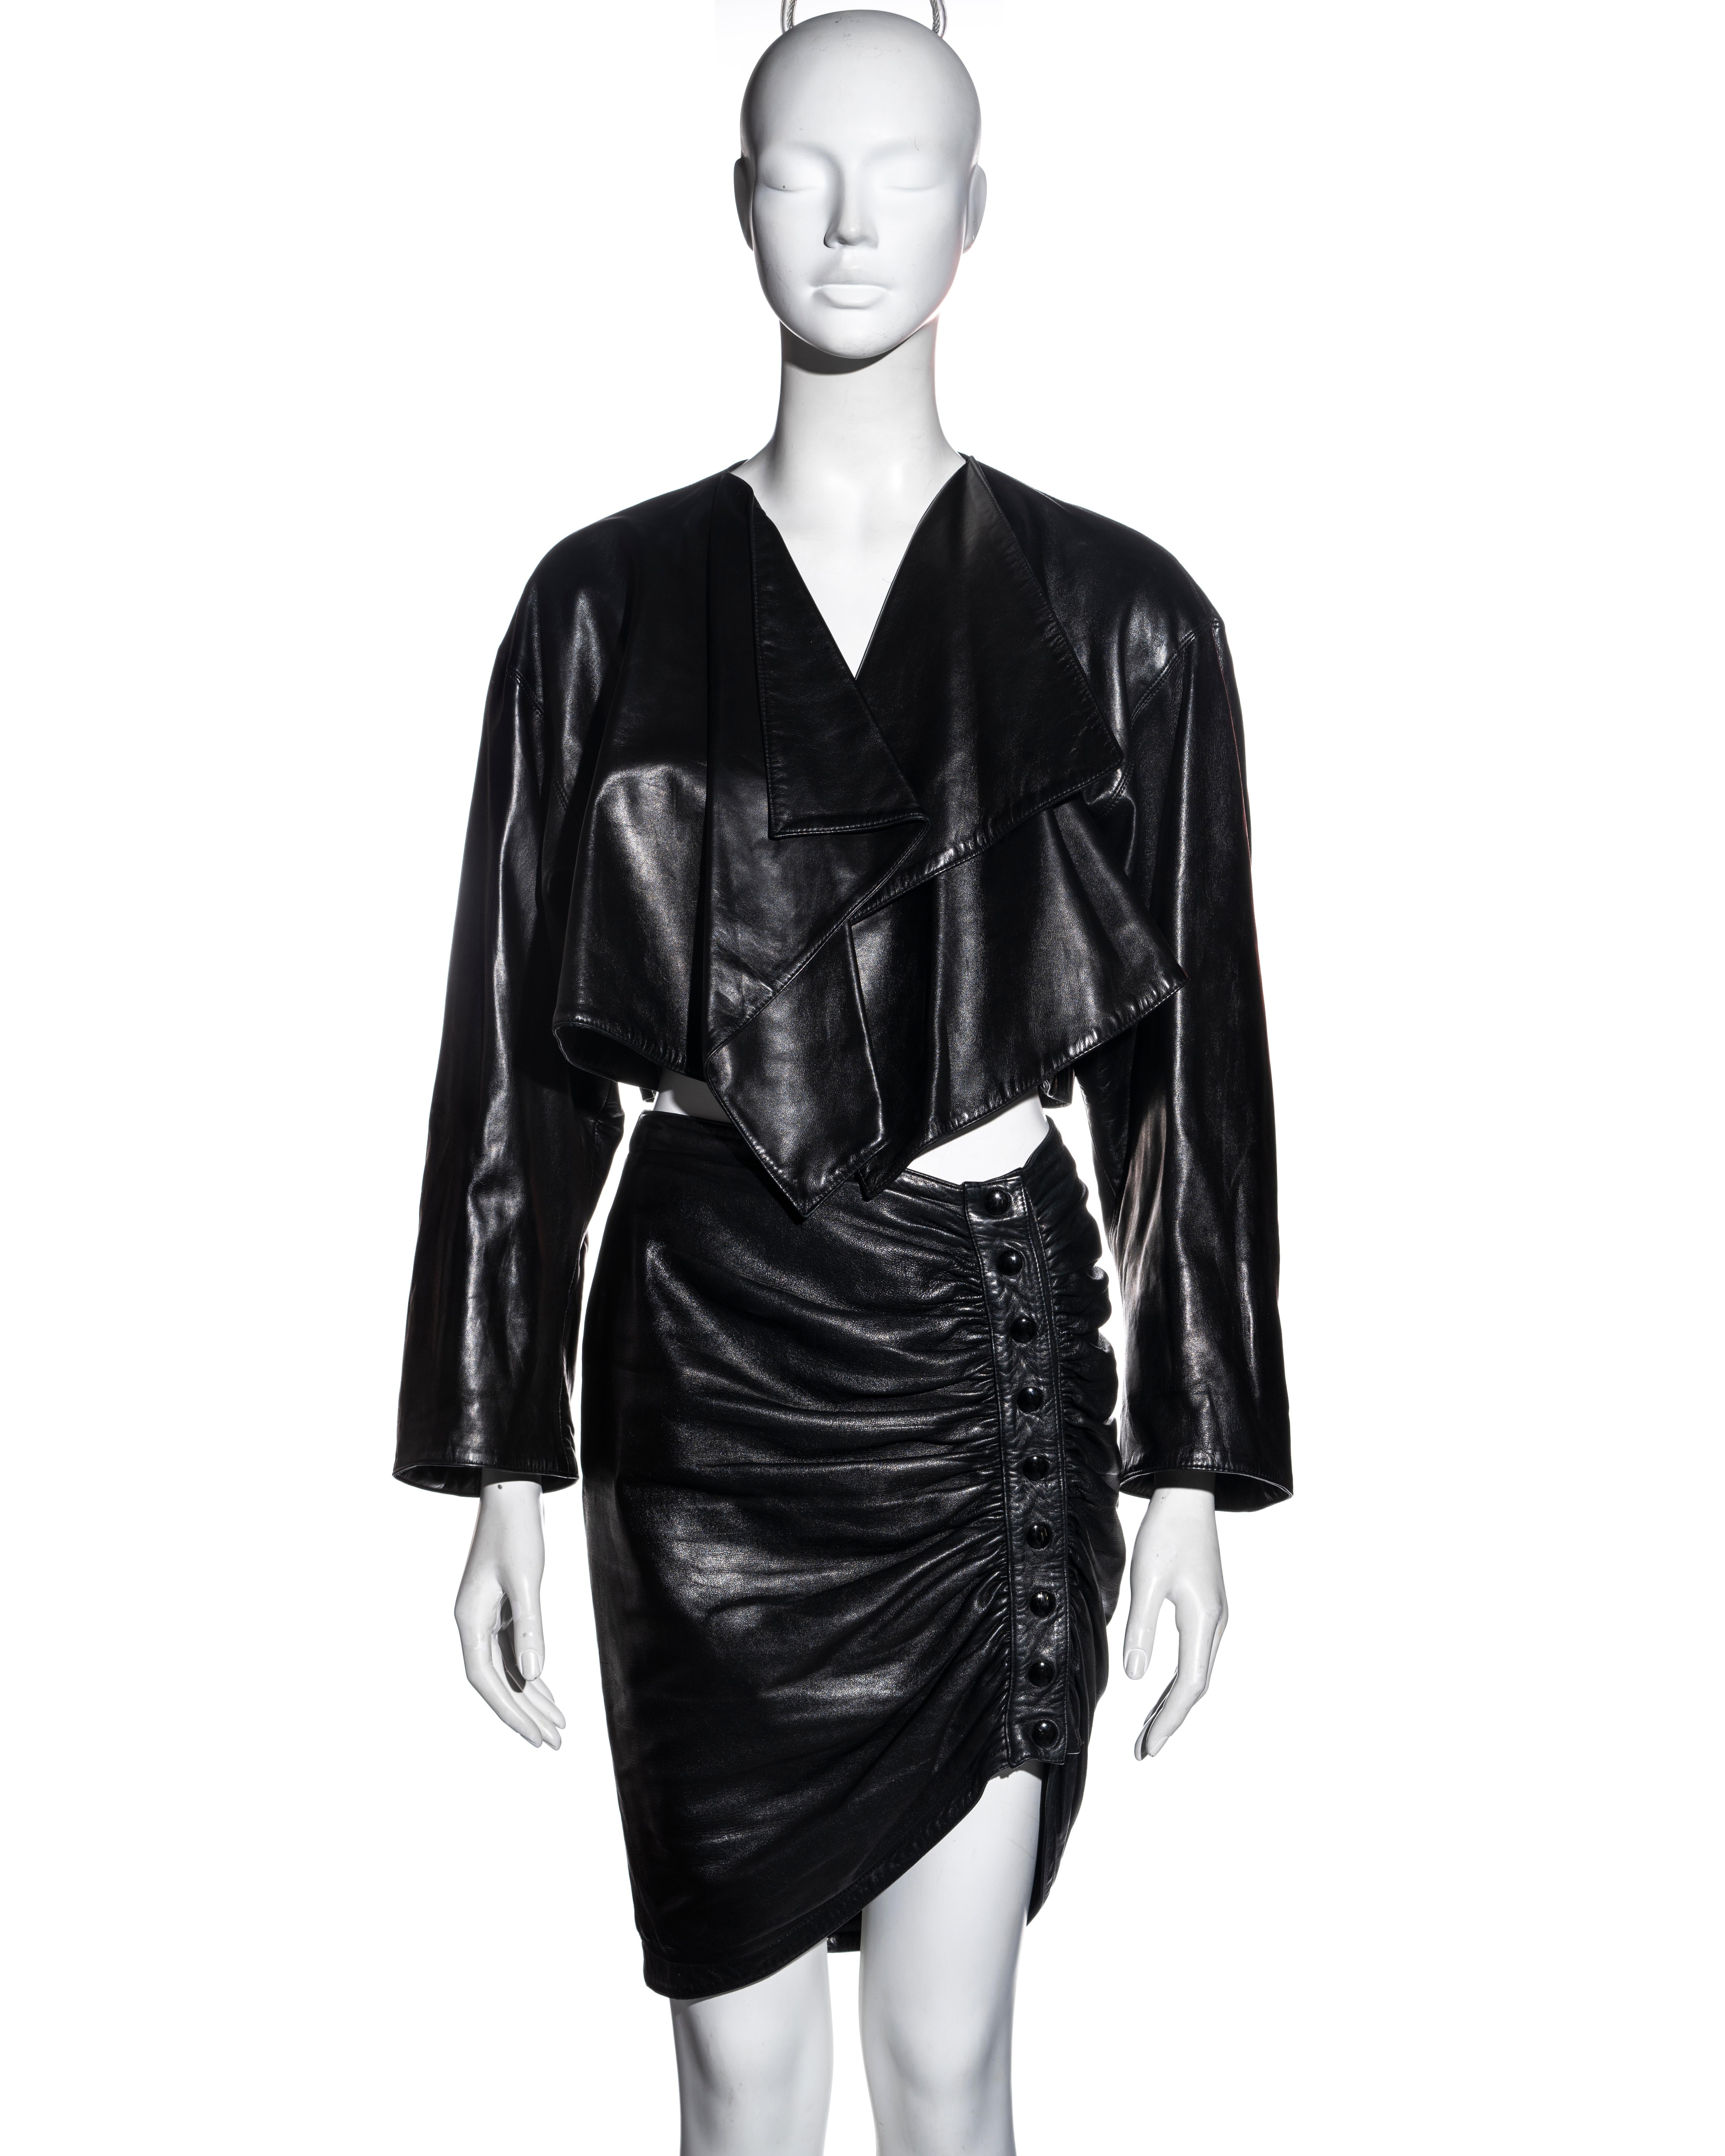 ▪ Rare Azzedine Alaia black leather jacket and skirt set
▪ Wide-cut bolero jacket with open front and draped lapels 
▪ Fitted pencil skirt with asymmetric hemline
▪ Ruched detail at the front opening with snap-button closures 
▪ FR 40 - UK 12 - US